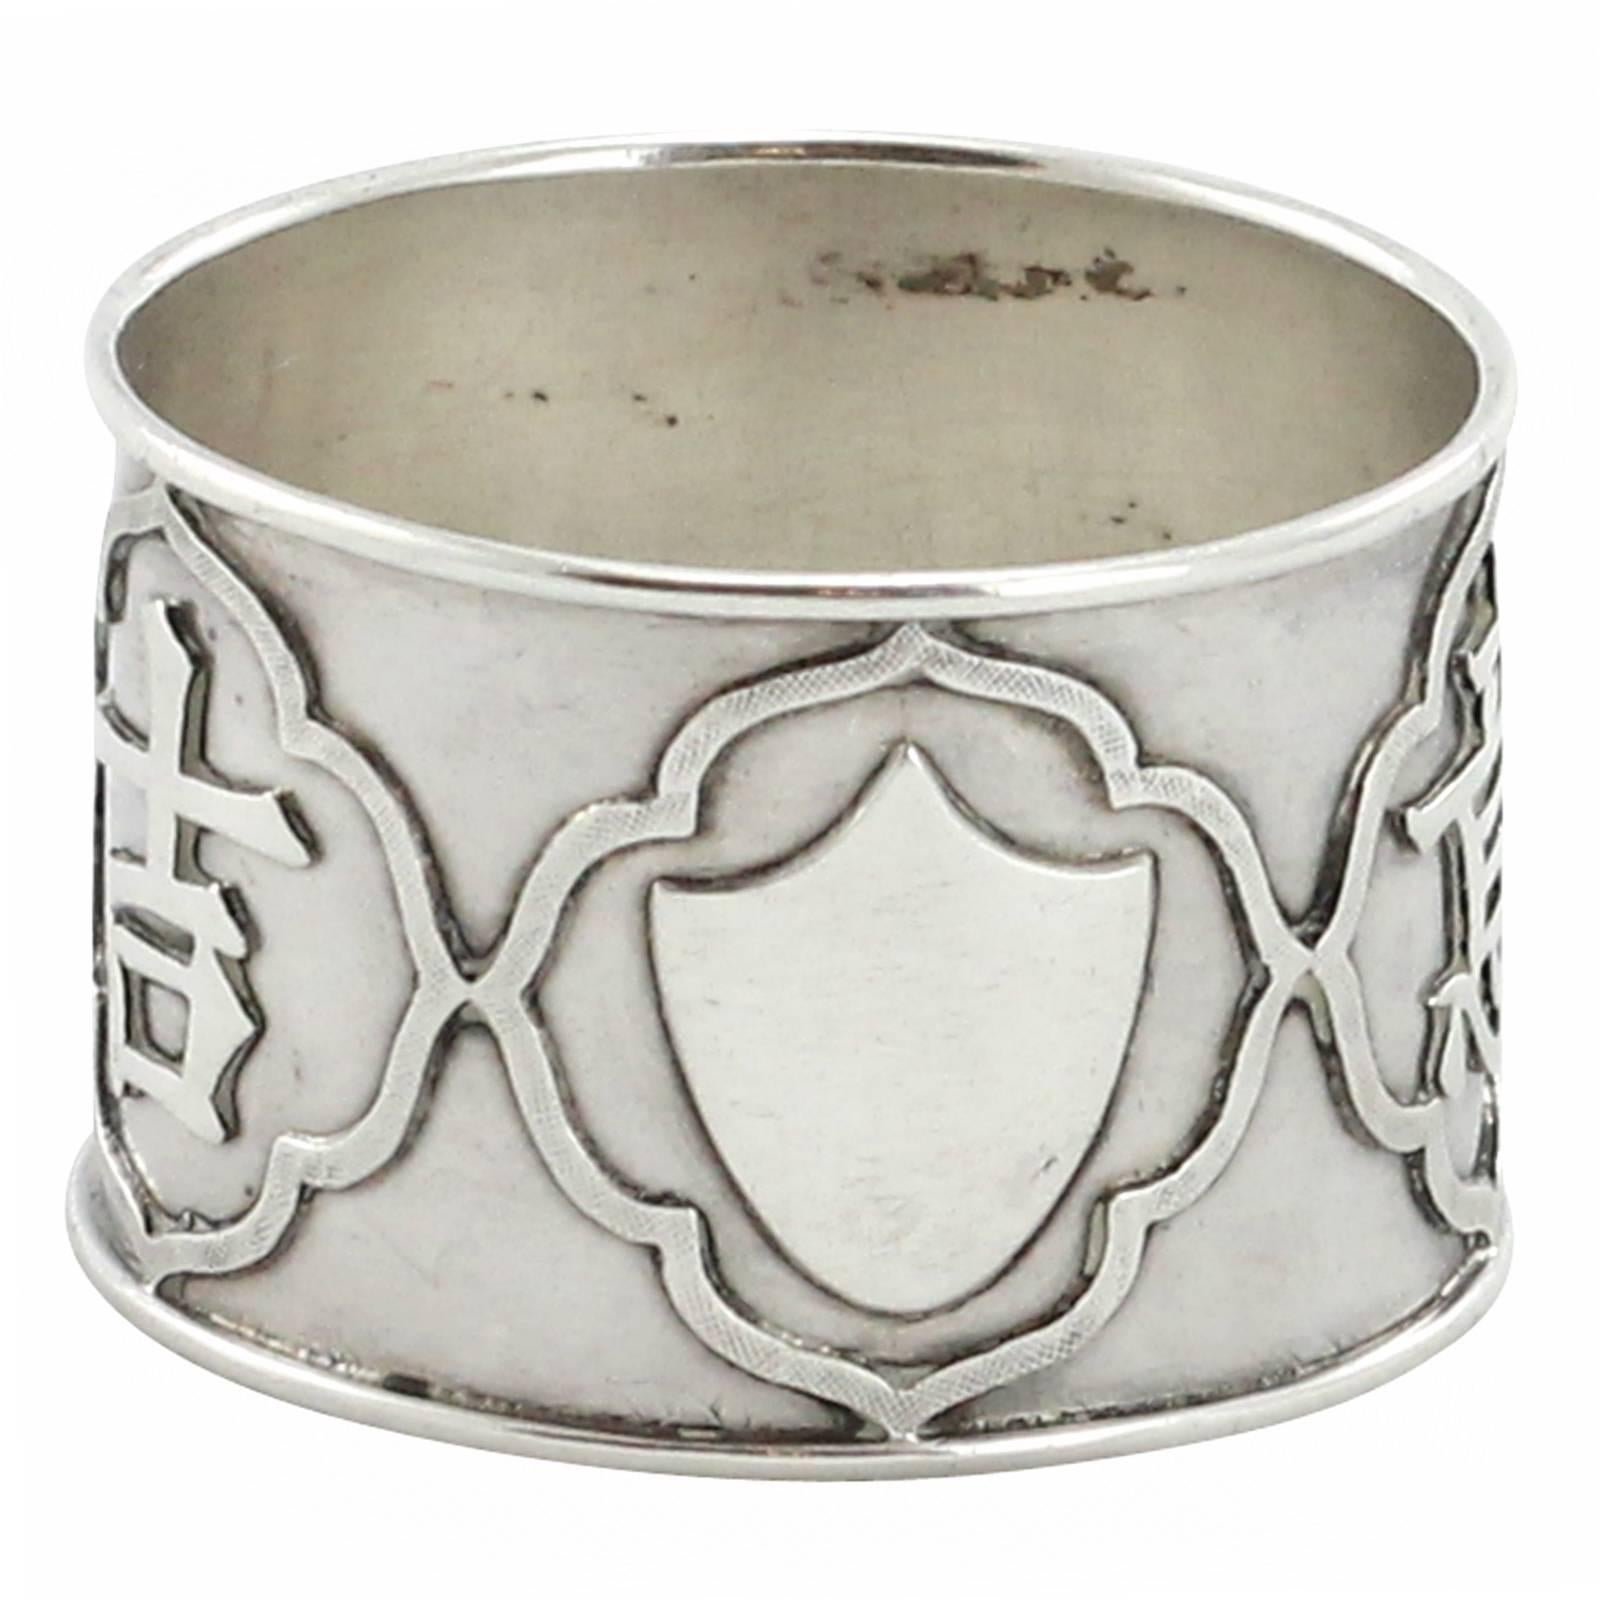 Chinese Qing Dynasty Export Silver Napkin Ring by Woshing